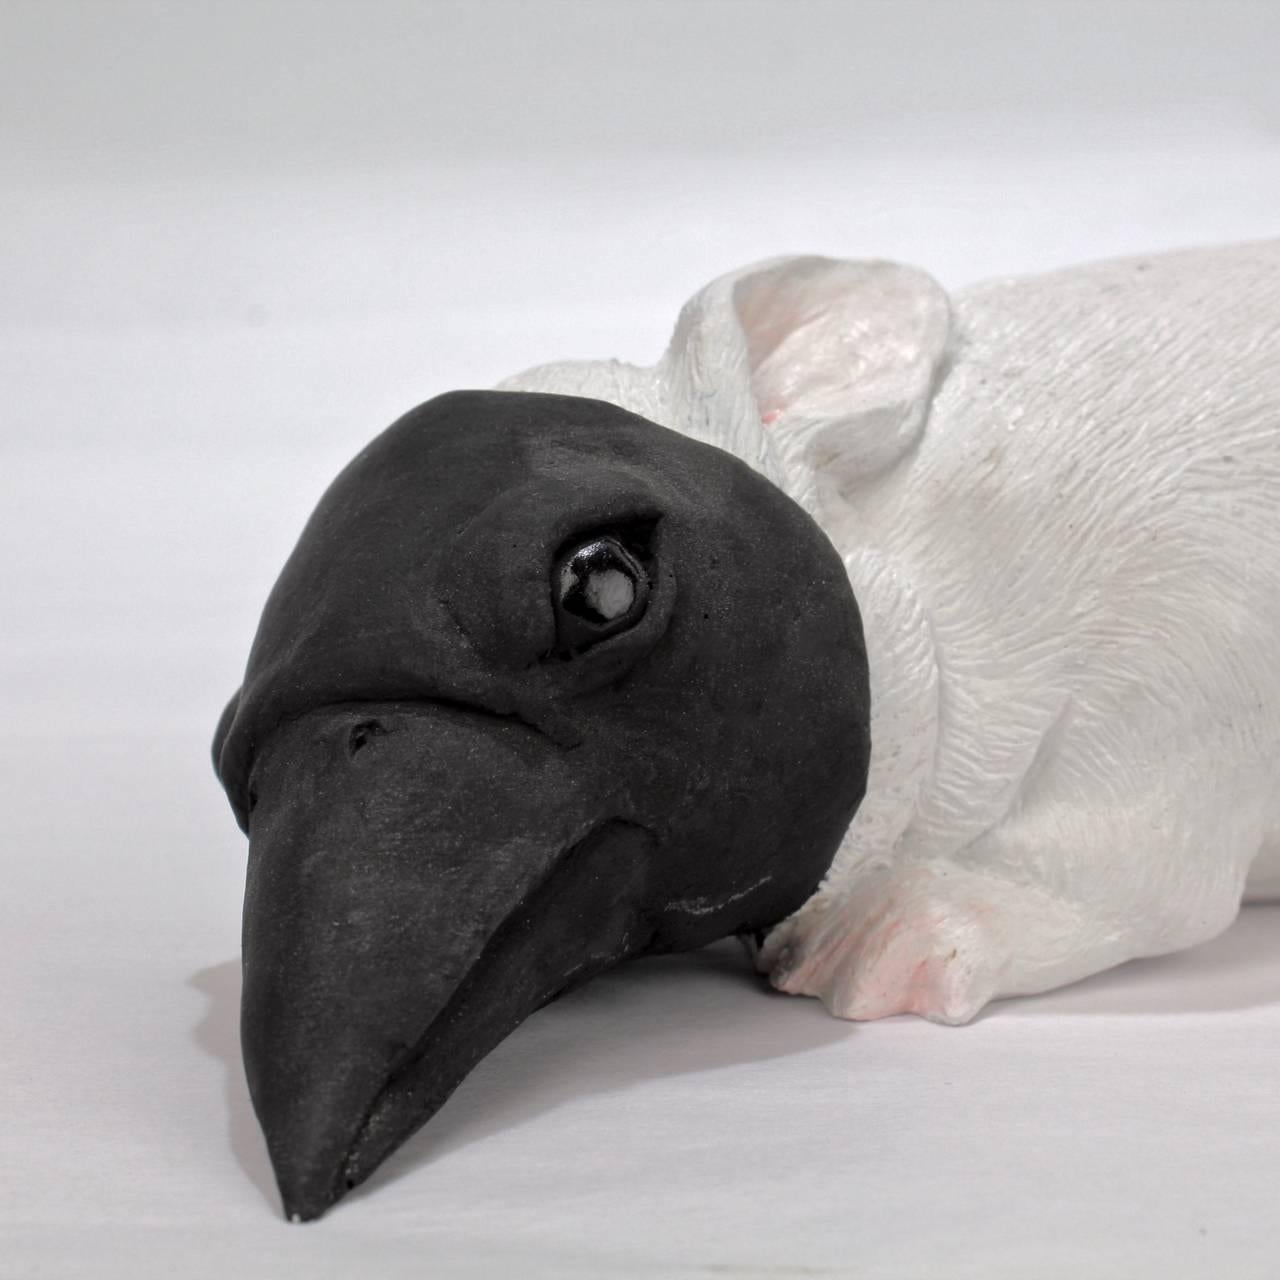 American Darla Jackson Baby Bunny with Crow's Mask White Painted Plaster Sculpture, 2011